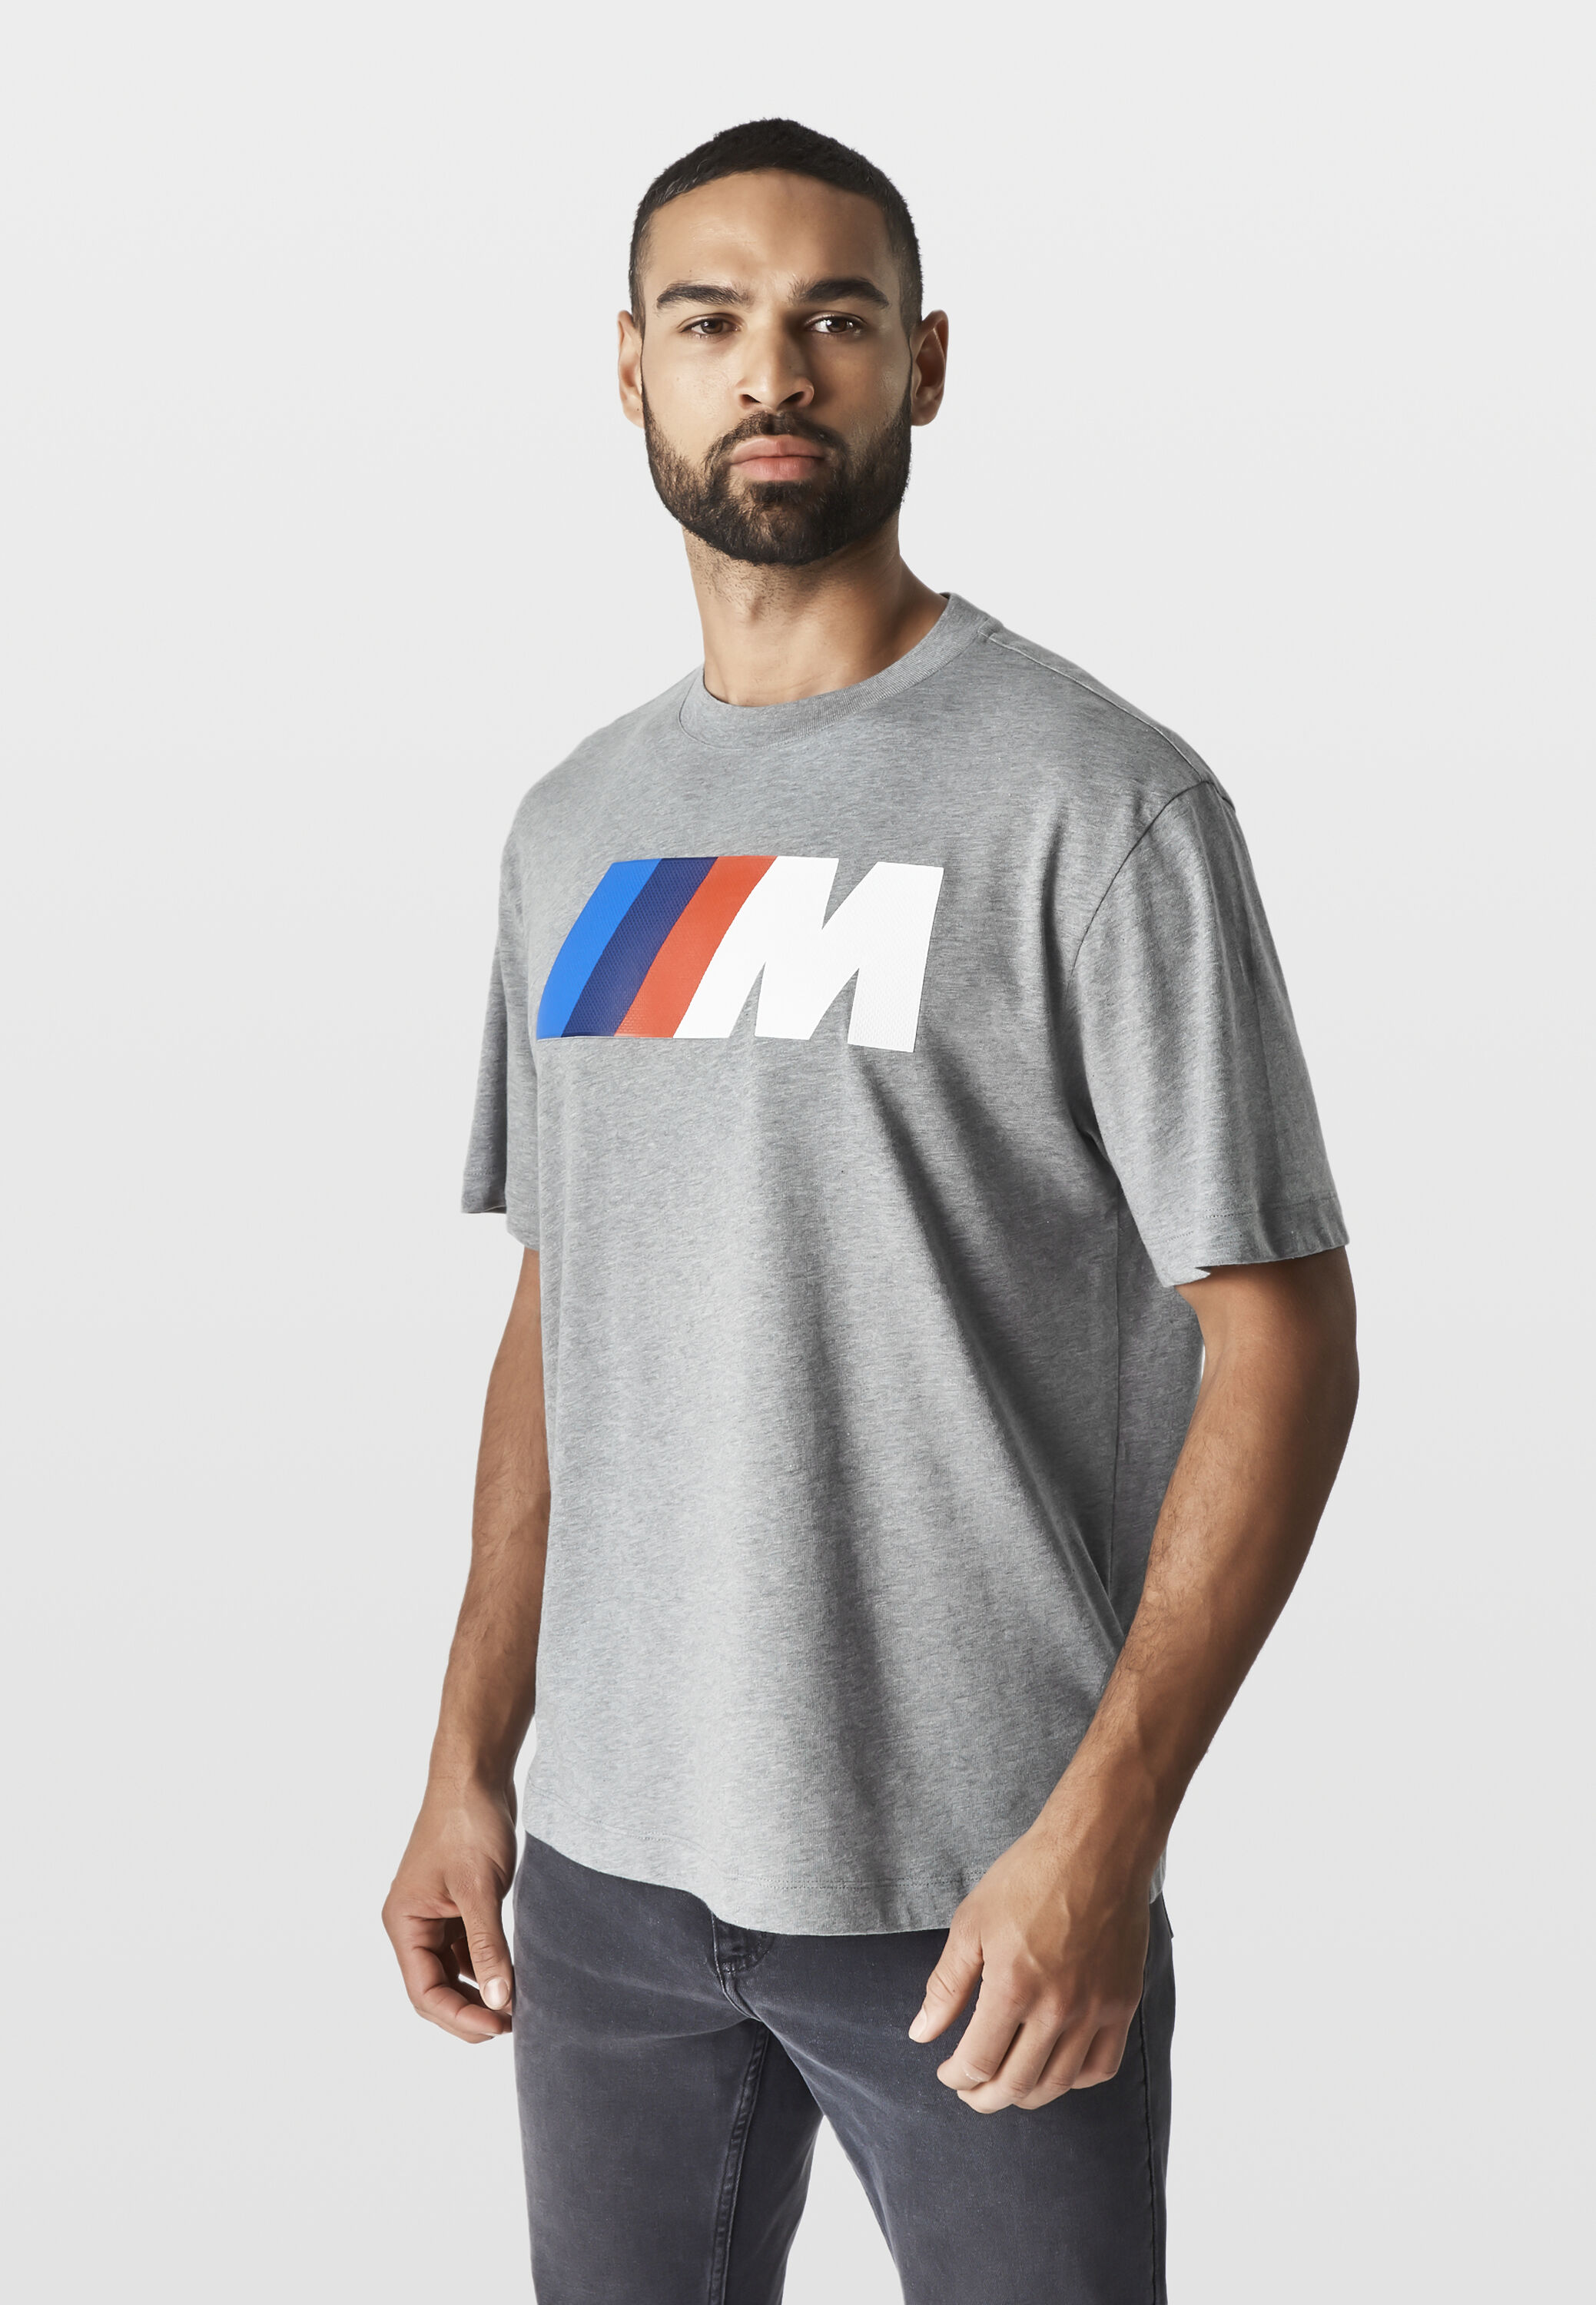 BMW Contrast T-Shirt and Shorts Set – Sublime Shop & Gifts